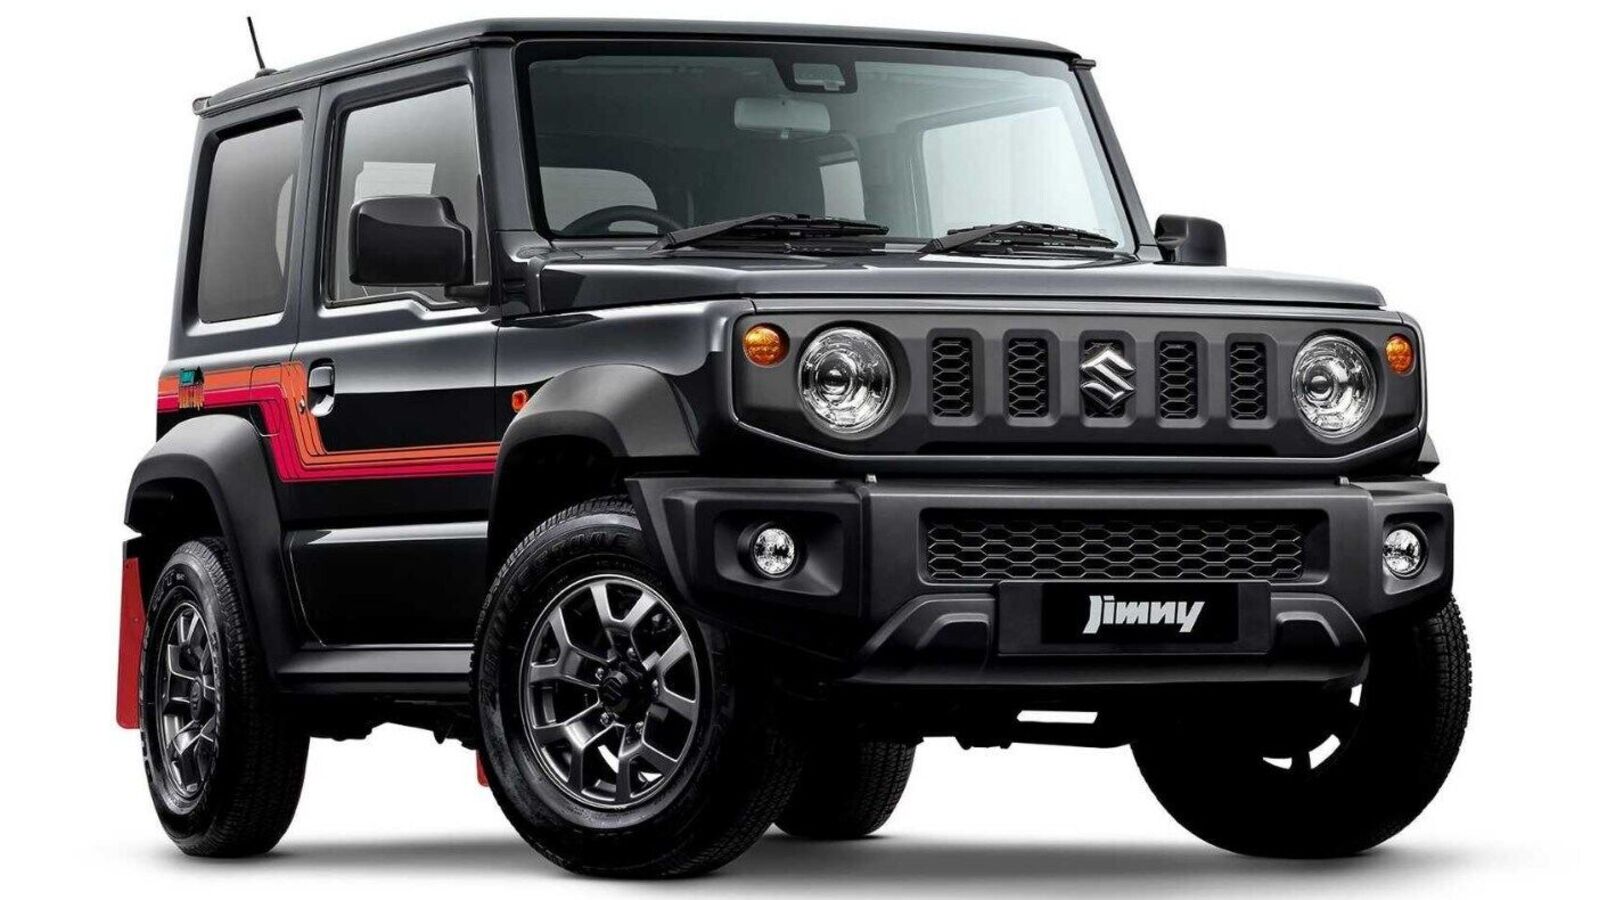 Check out Suzuki Jimny Special Heritage Edition. Only 300 up for grabs